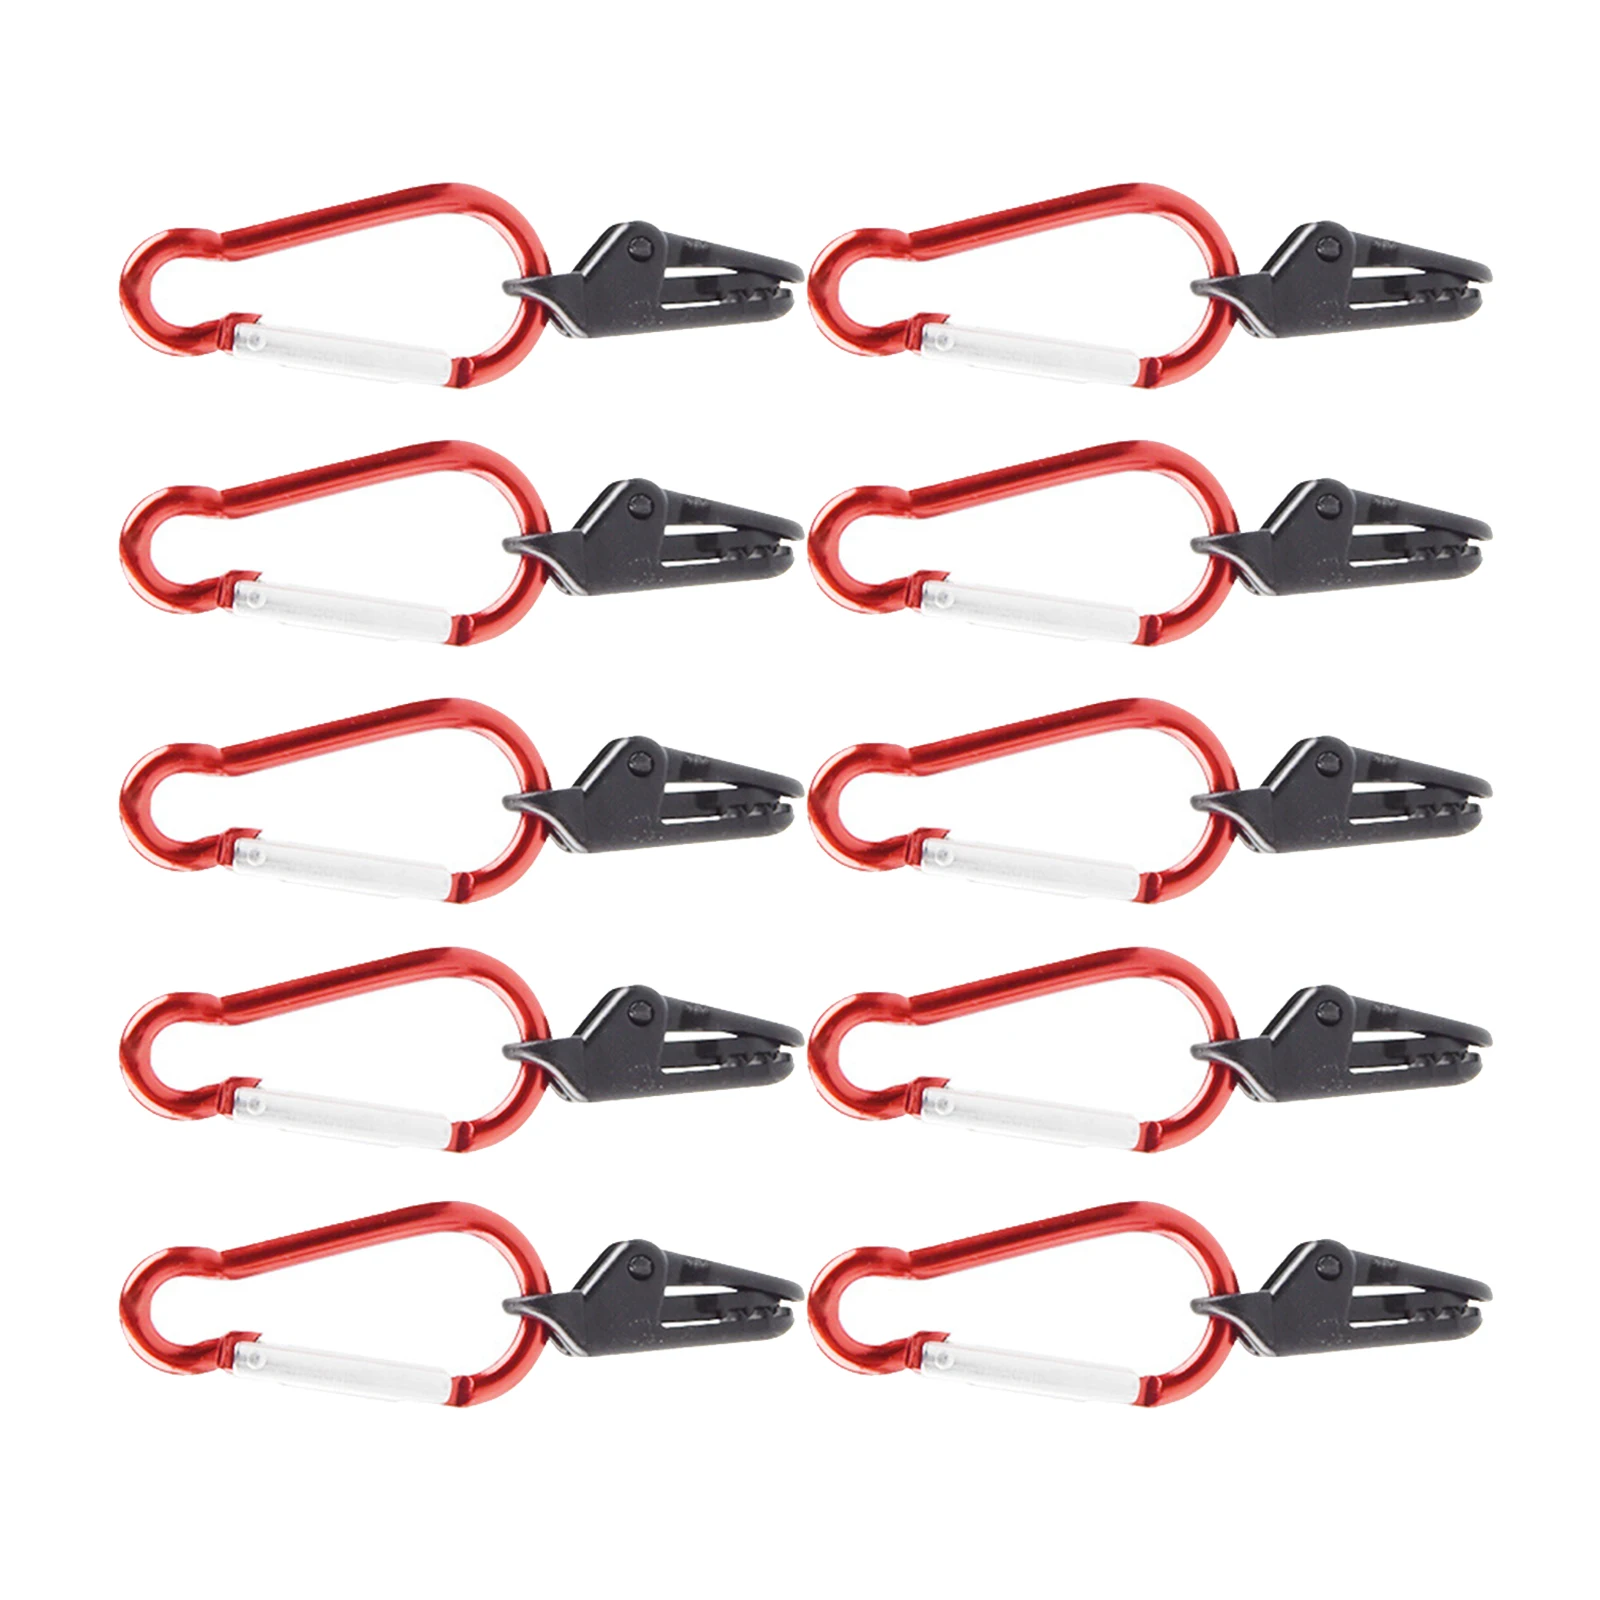 10x Tent Tarp Clamp Clip with D-Shaped Carabiners Durable Plastic Tarp Clips Lock Tent for Camping Hiking Field Hunting